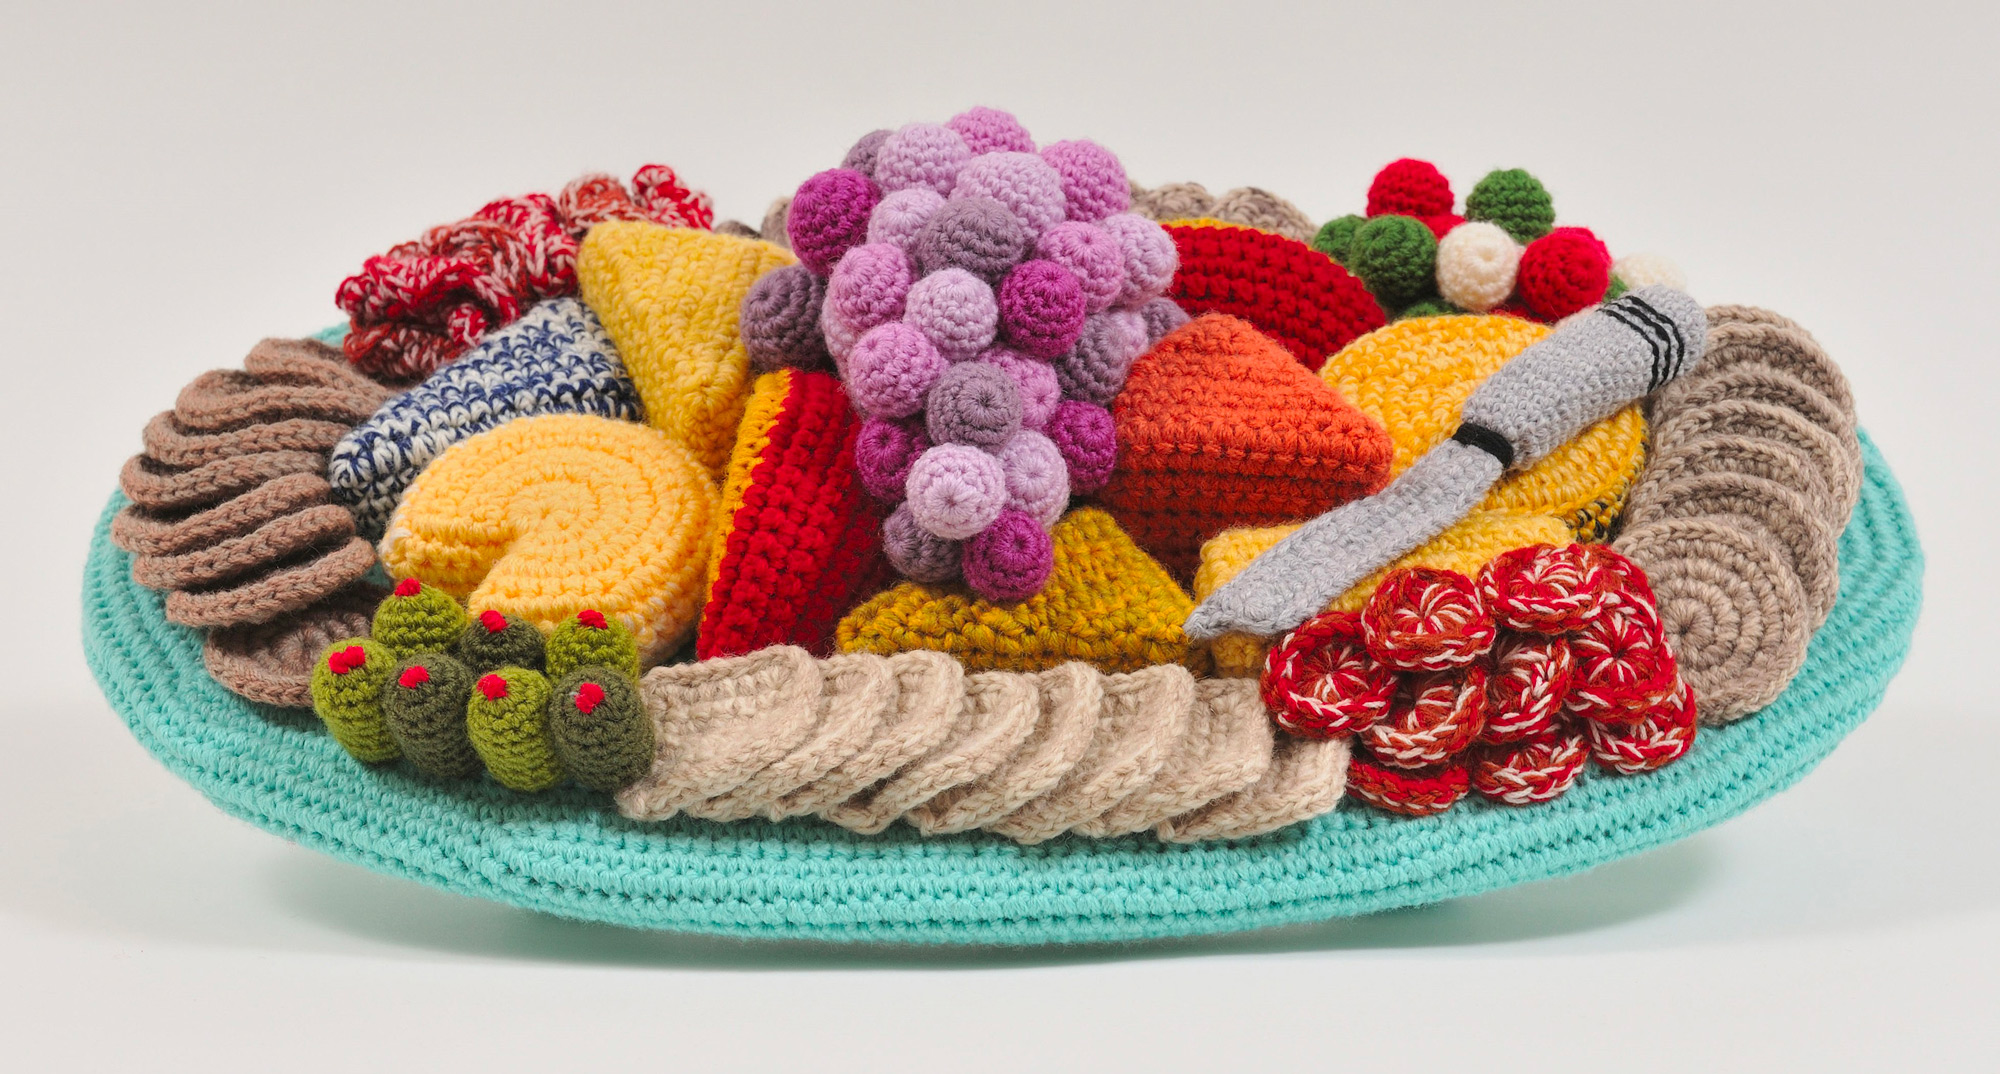 Crocheted Hams and Hairdryers by Trevor Smith Evoke Memories of Mid-Century Domesticity